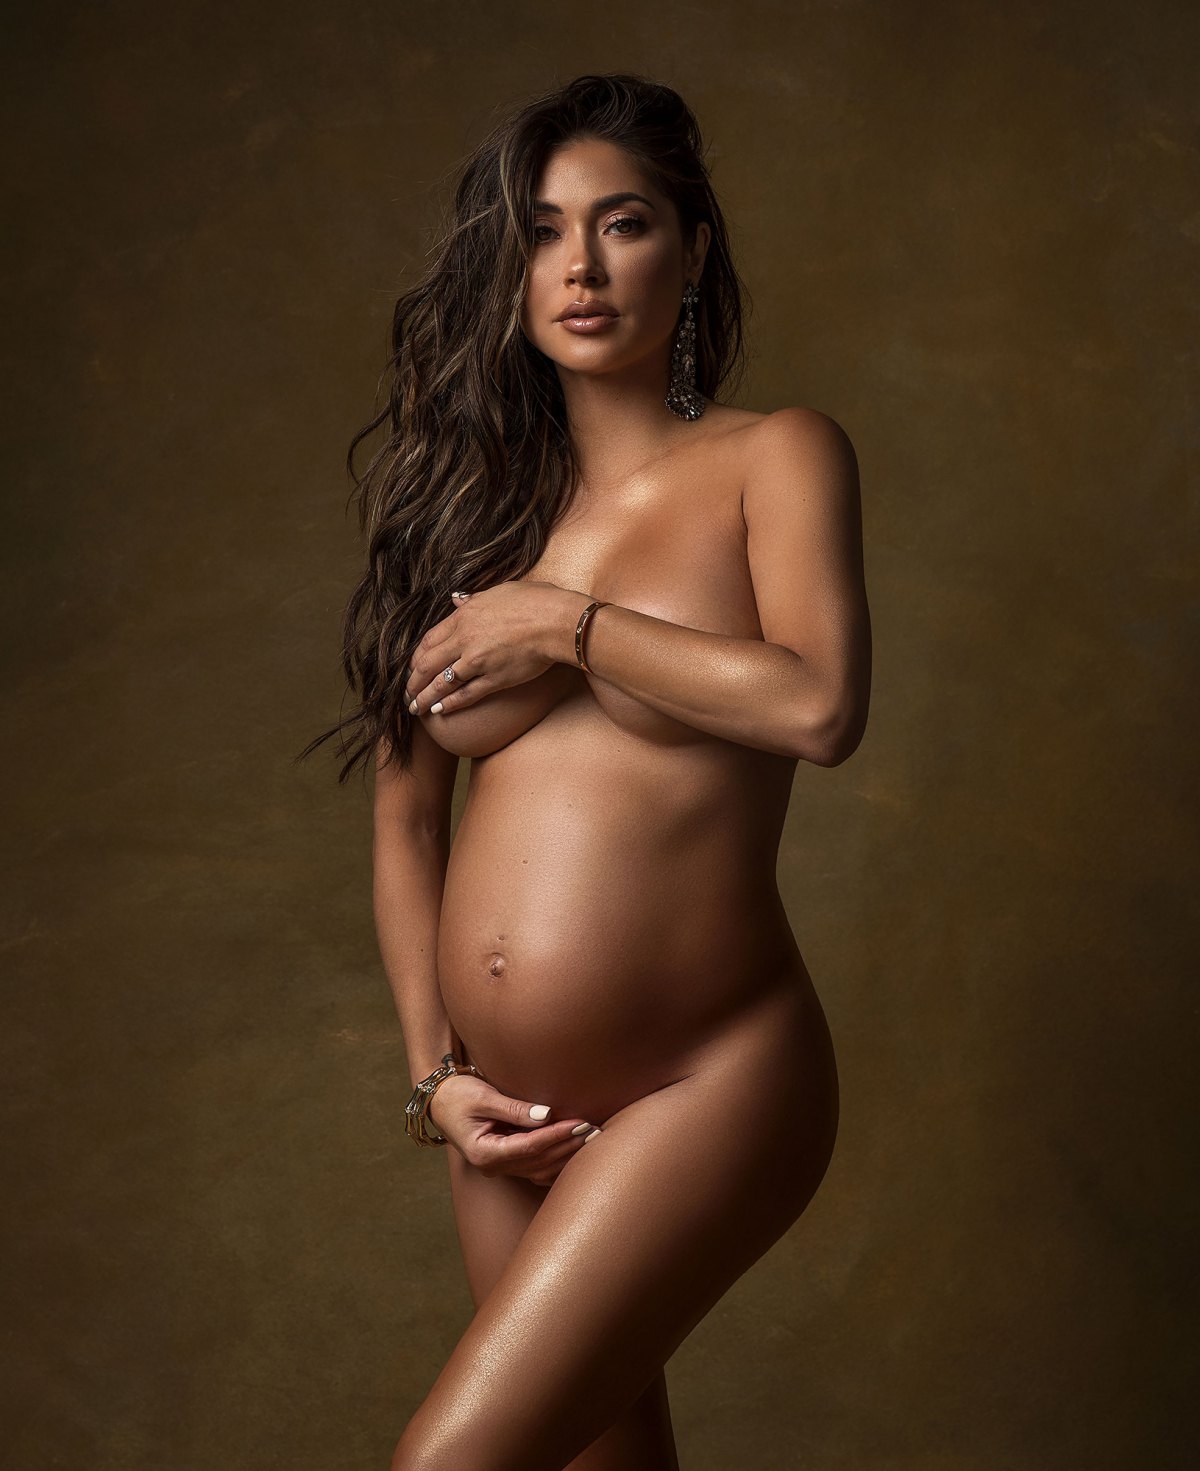 Pregnant Beautiful Naked - Celebrities Posing Nude While Pregnant: Maternity Pics